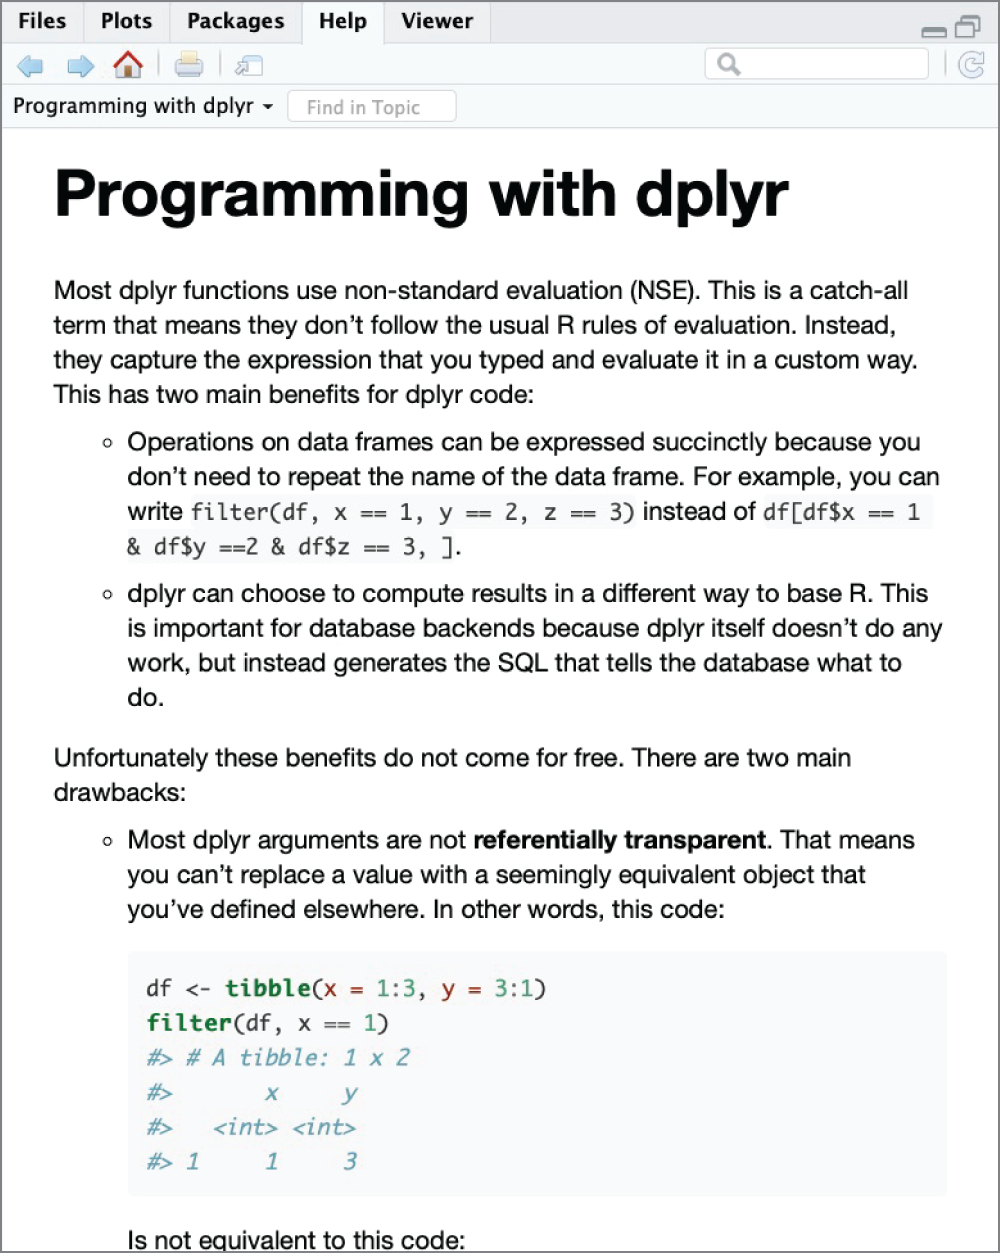 Snapshot of RStudio displaying the programming vignette from the dplyr package.